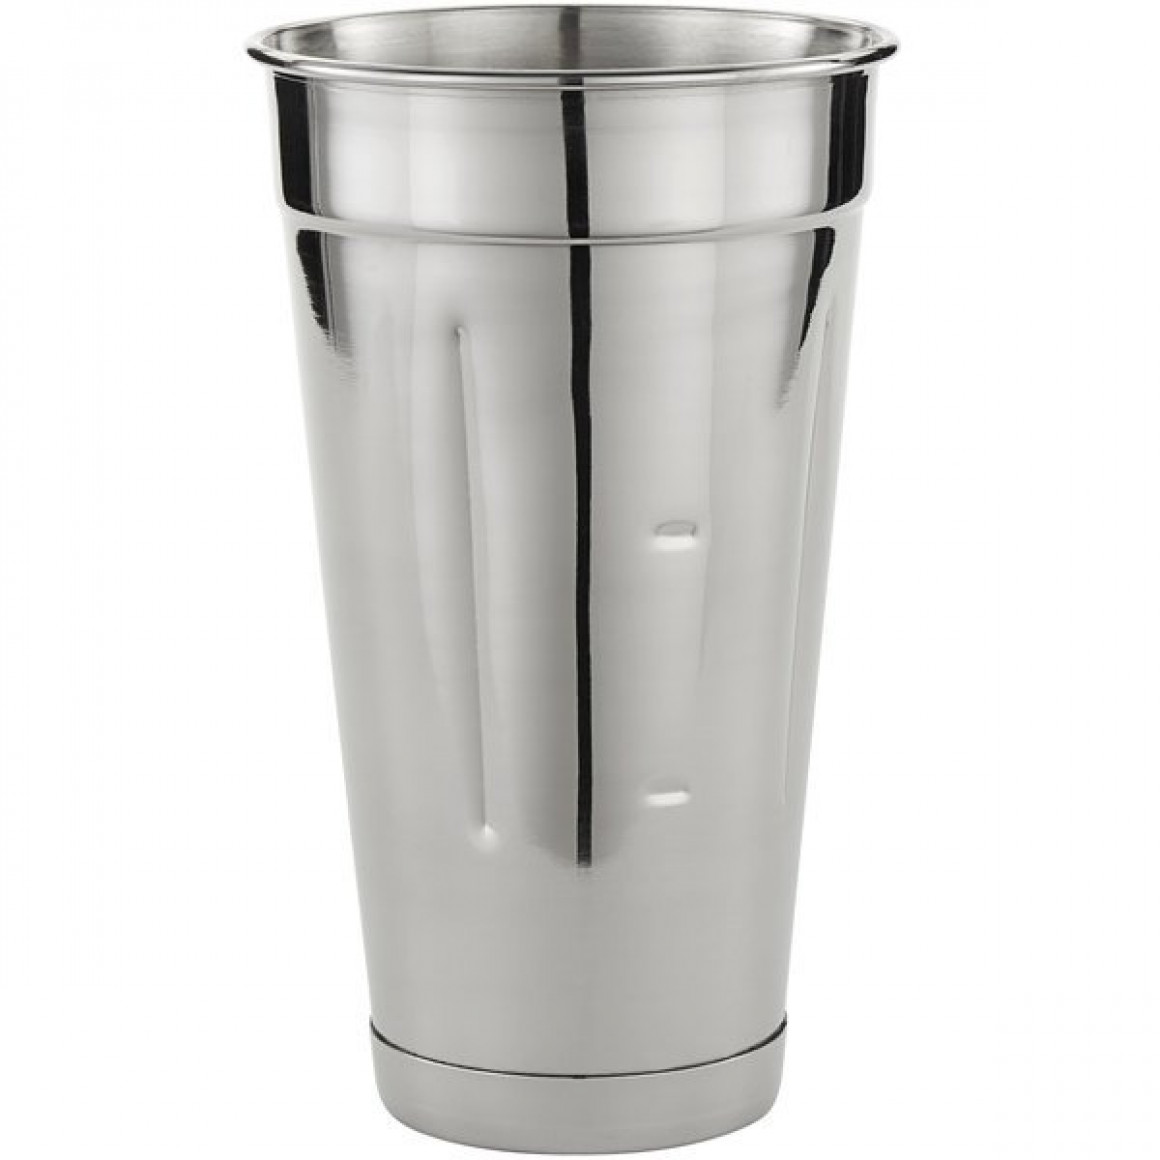 COCKTAIL SHAKER, MALT CUP, STAINLESS STEEL, 32 OZ.